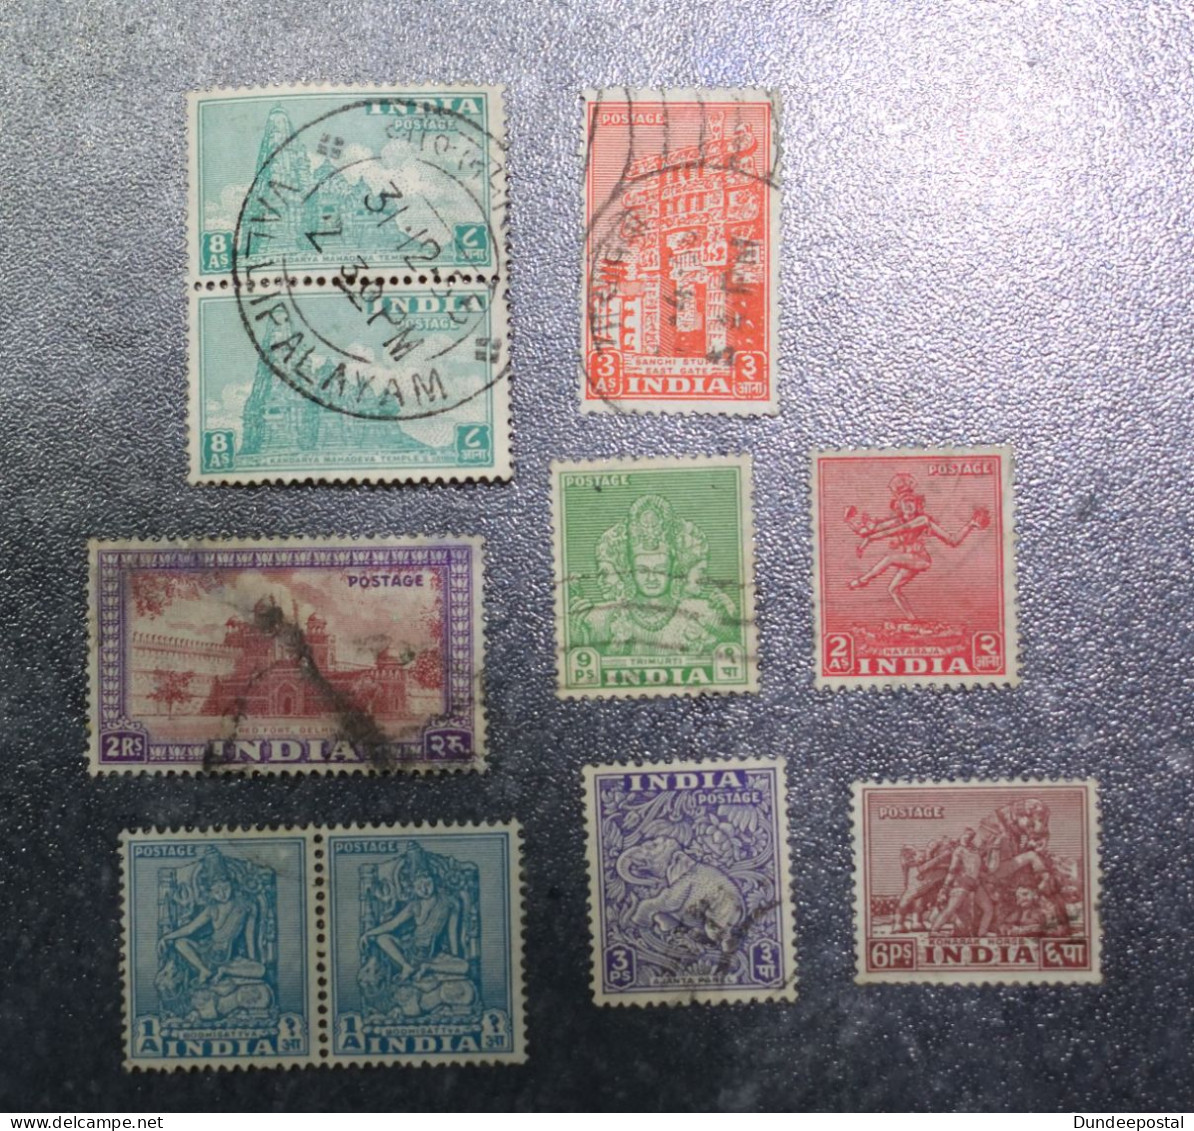 INDIA  STAMPS  Coms 1949  (N18)    ~~L@@K~~ - Used Stamps